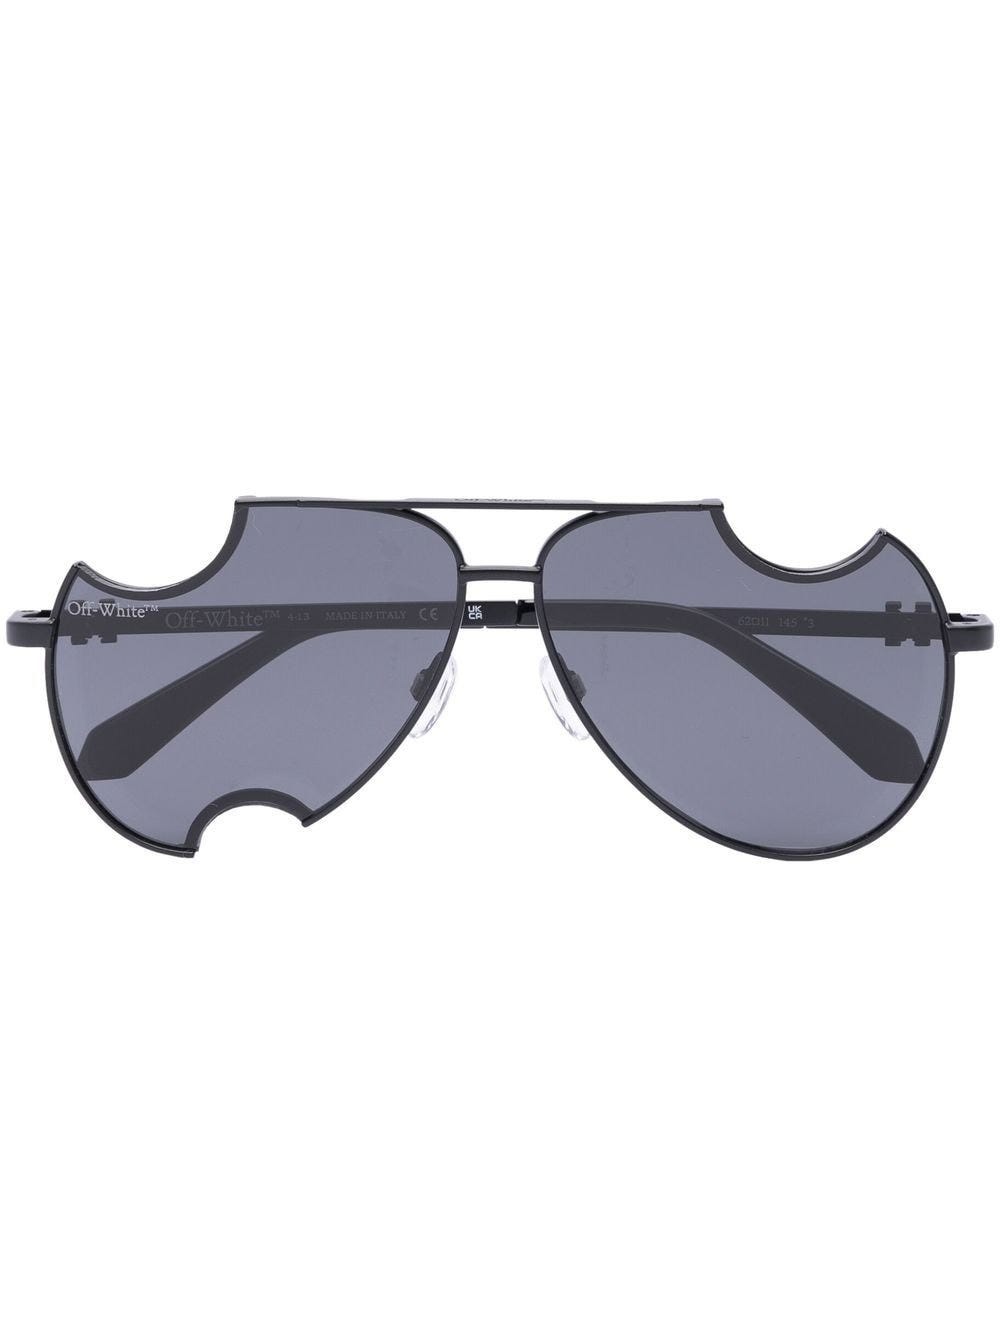 OFF-WHITE DALLAS BLACK SUNGLASSES WITH CUT-OUT DETAIL